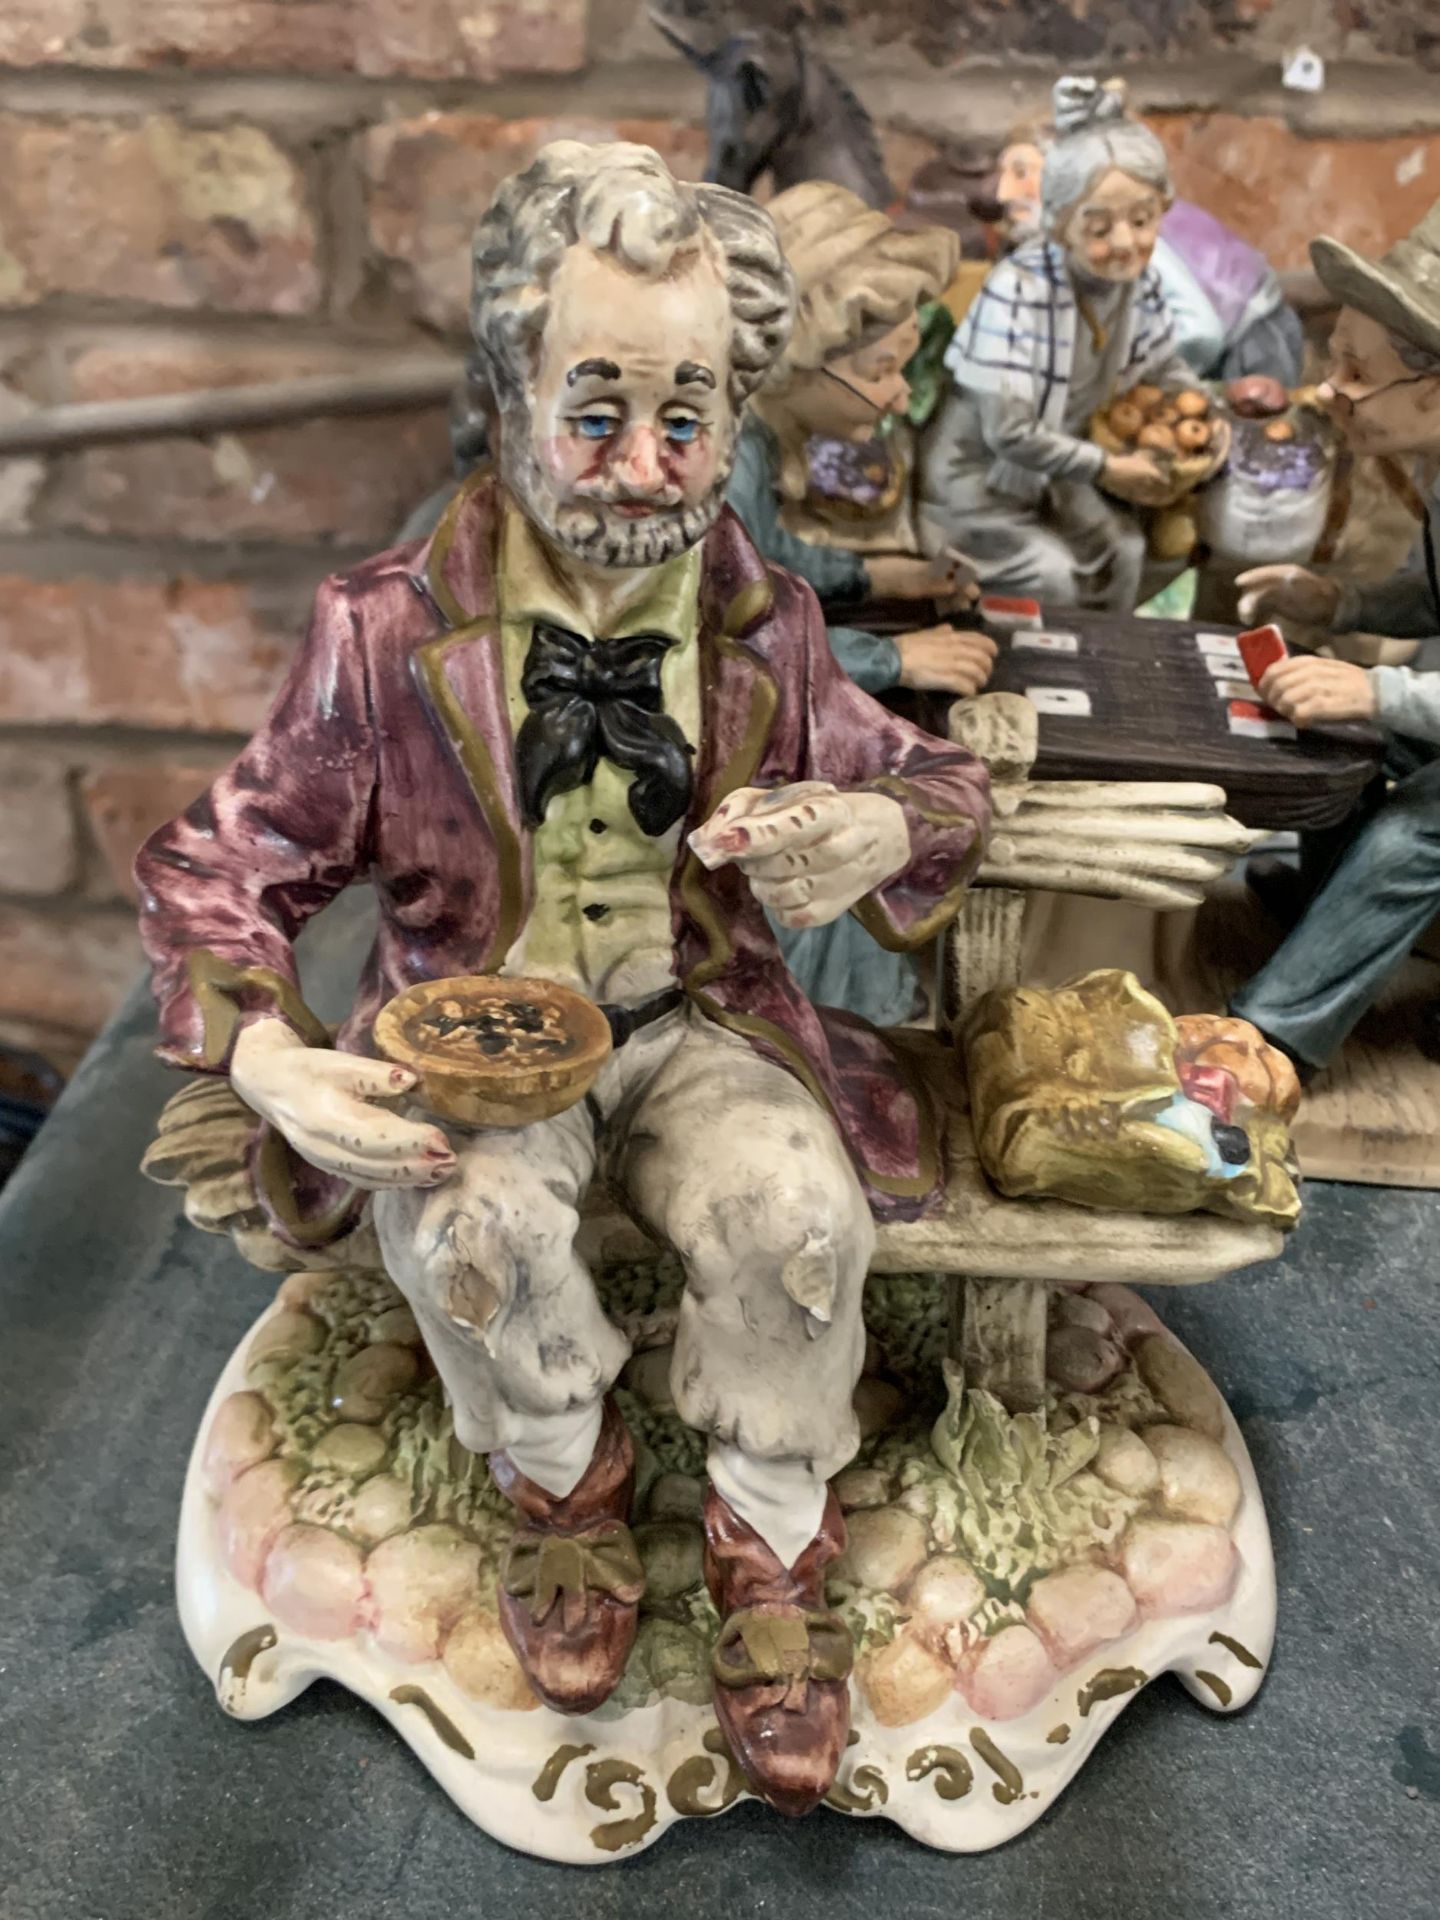 SIX CHALKWARE FIGURINES FEATURING A COUPLE PLAYING CARD GAMES, LADY WITH DONKEY AND CART ETC - Image 4 of 4